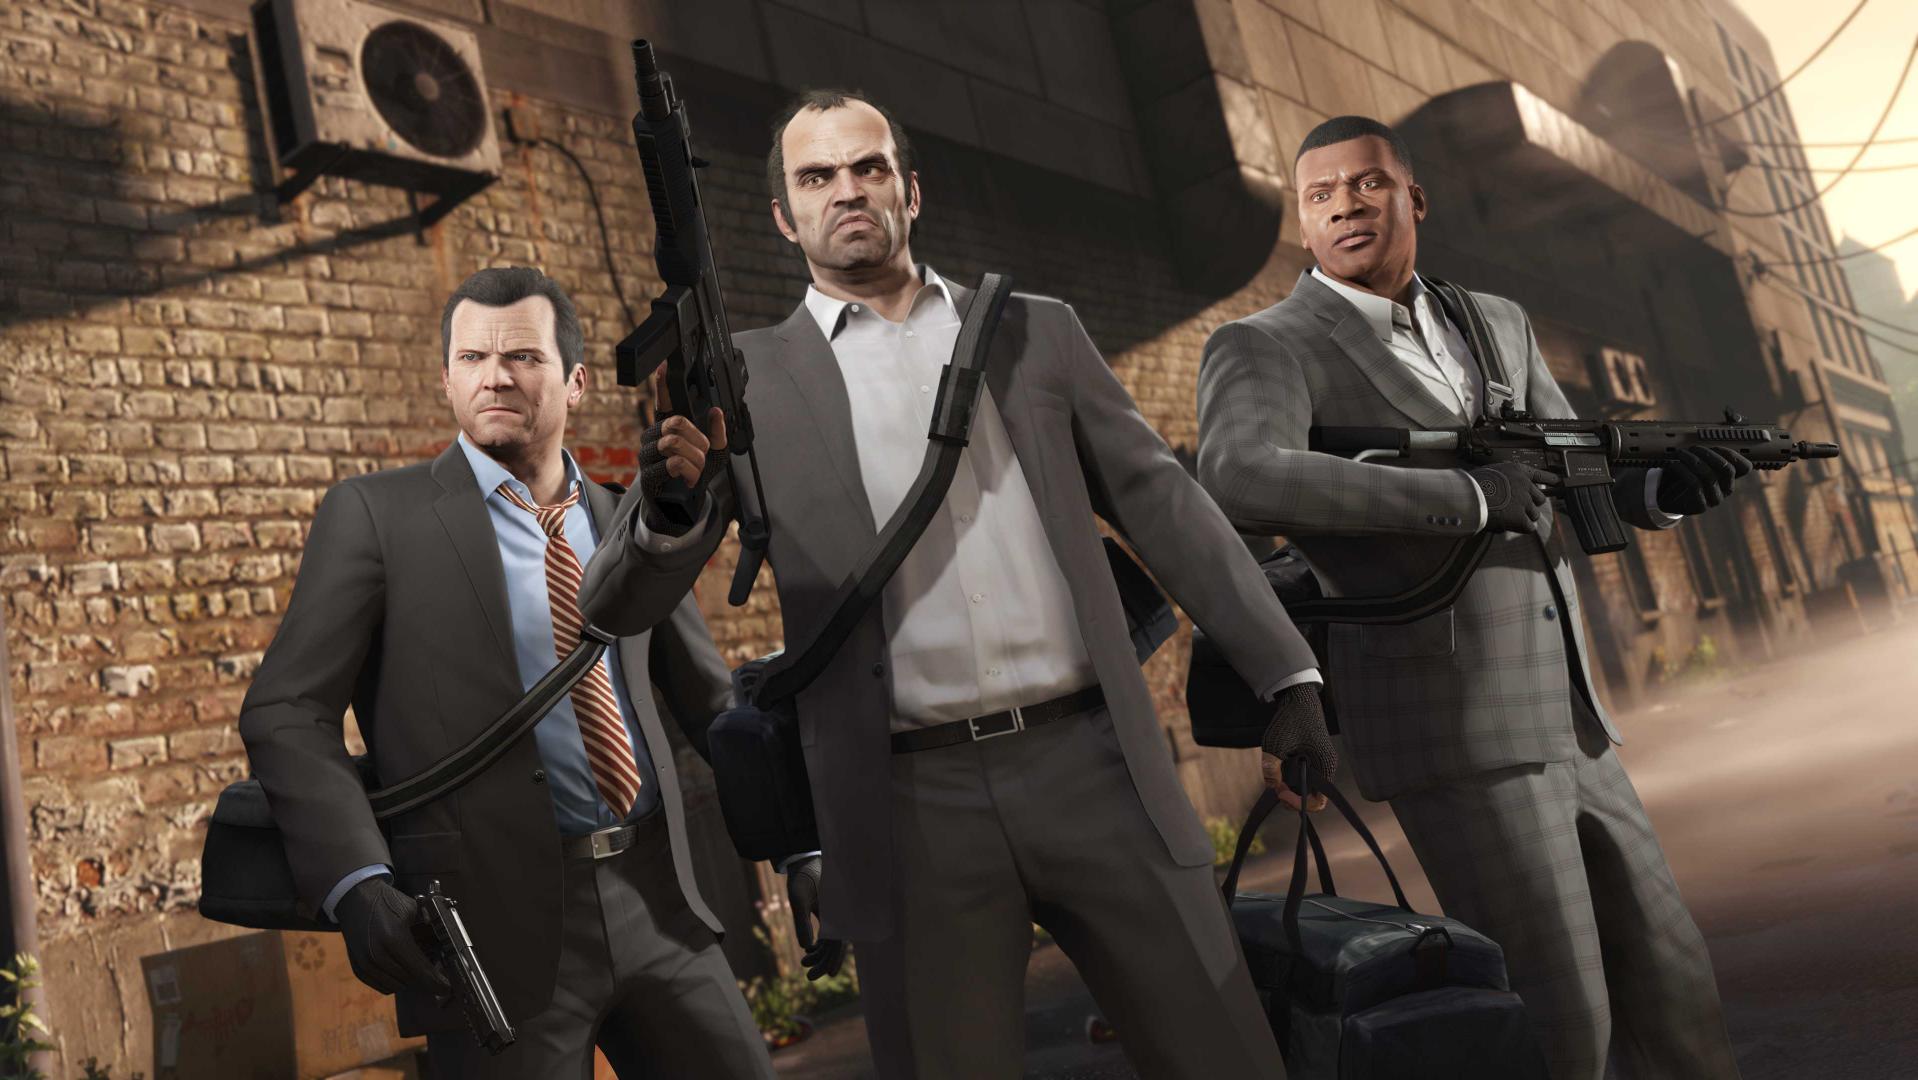 GTA 5 is the biggest hit in franchise history with over 150 million copies sold worldwide.